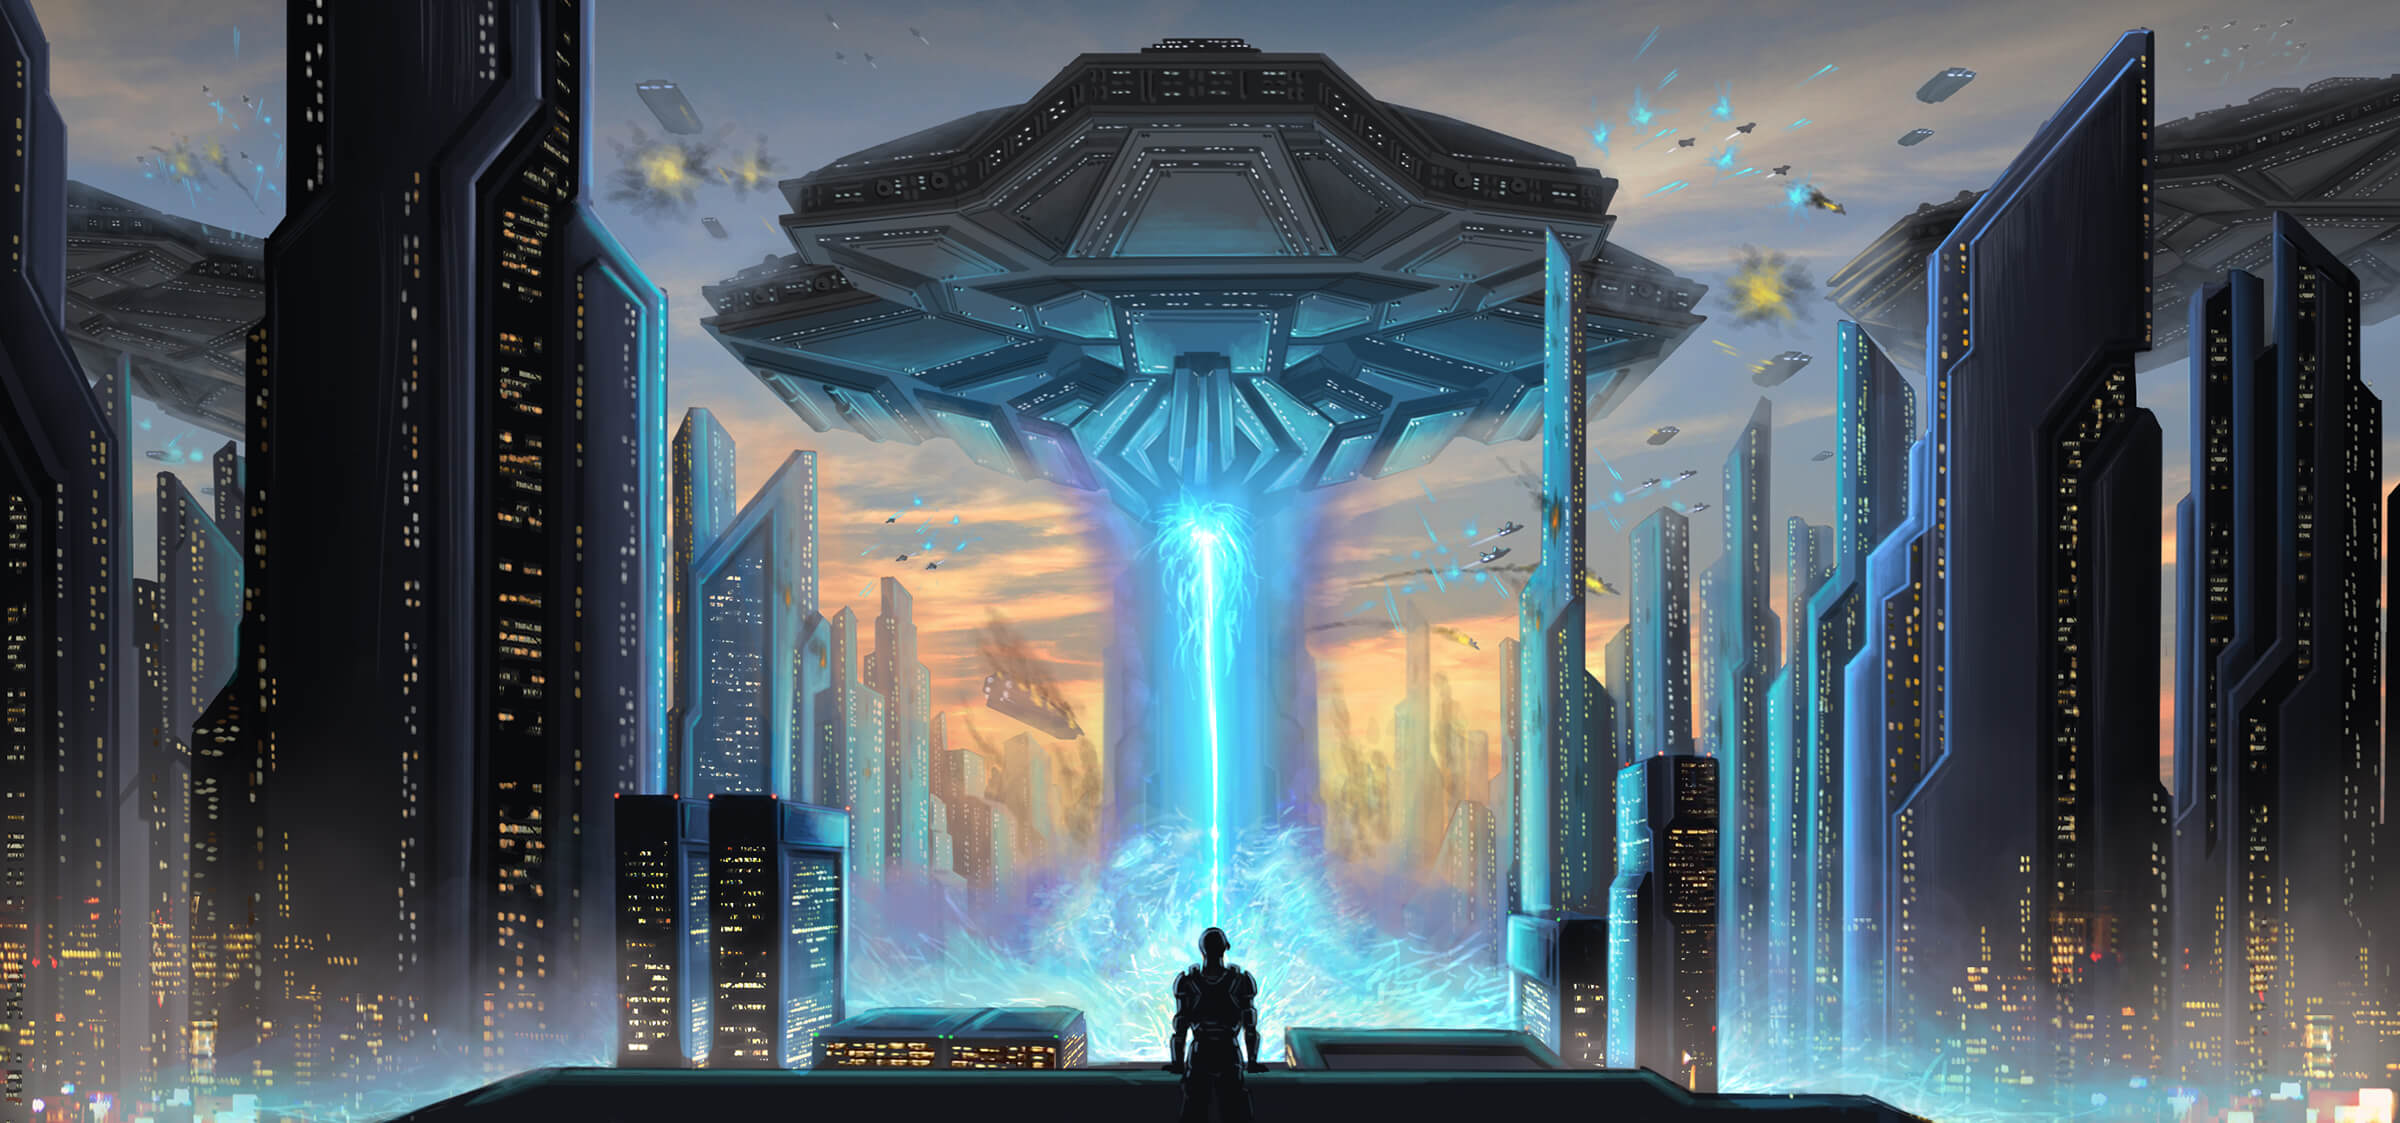 digital painting of an alien airship raining blue fire upon a city while a solitary person watches from a roof top